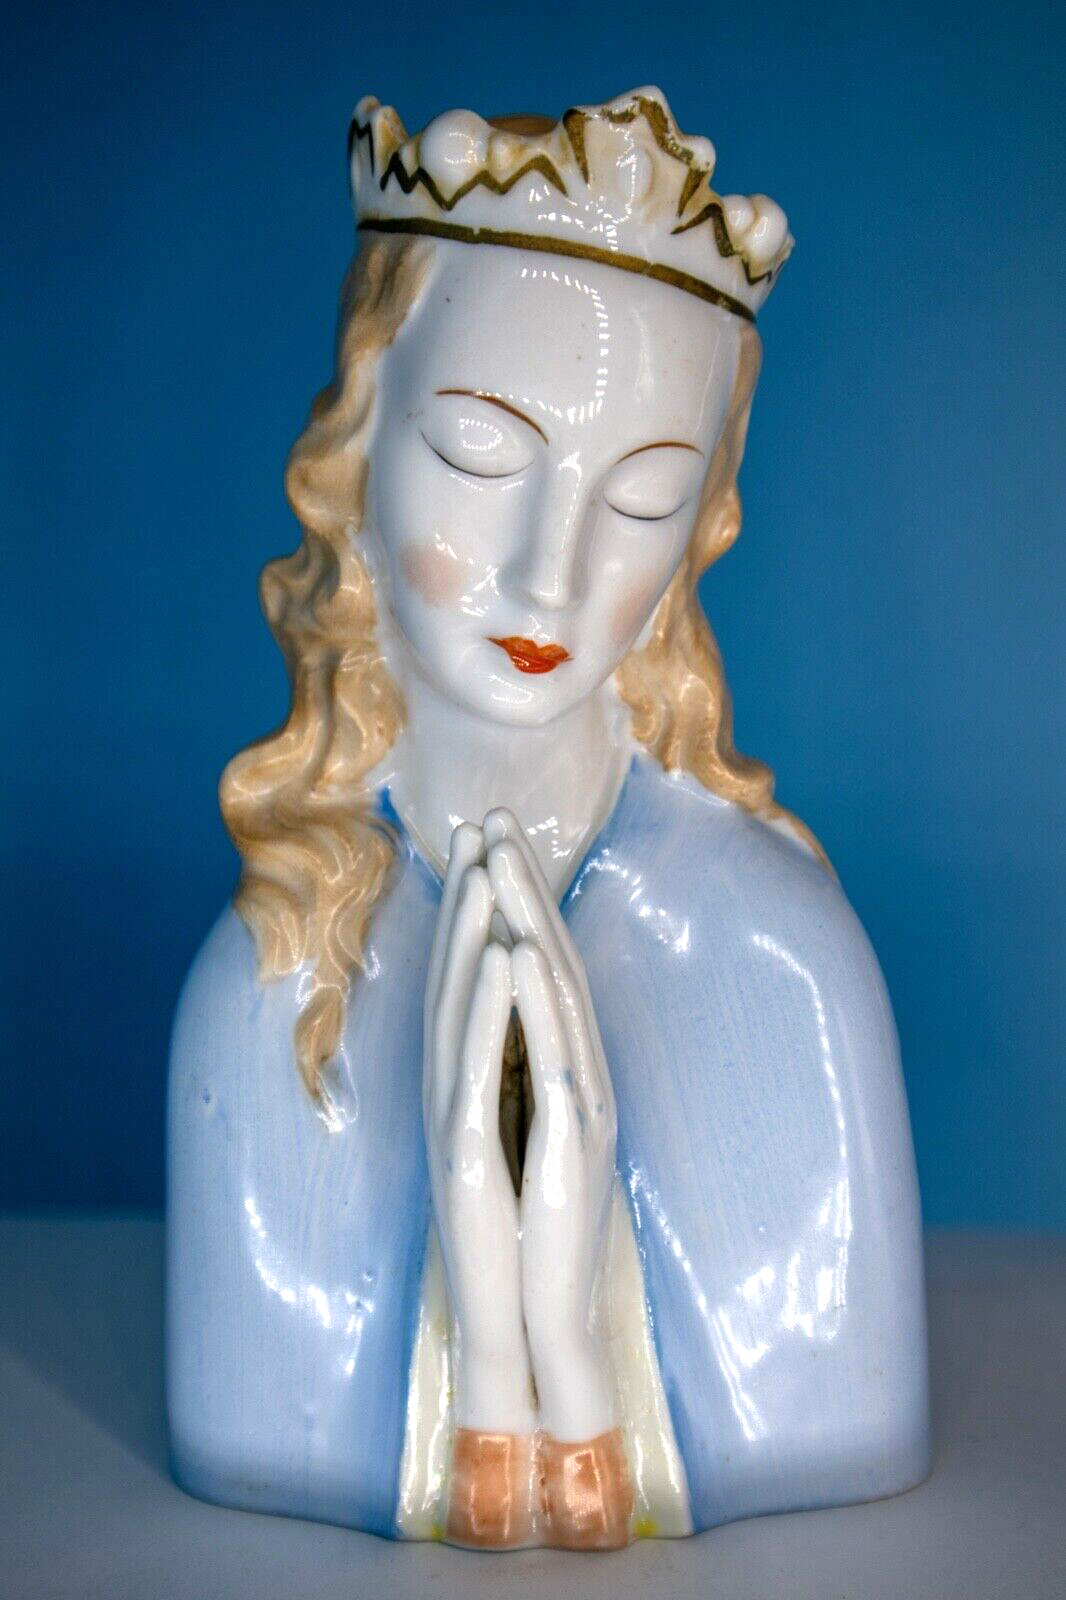 L&M Vintage Bone China Praying Madonna with Crown Figurine - 6 Inches Tall